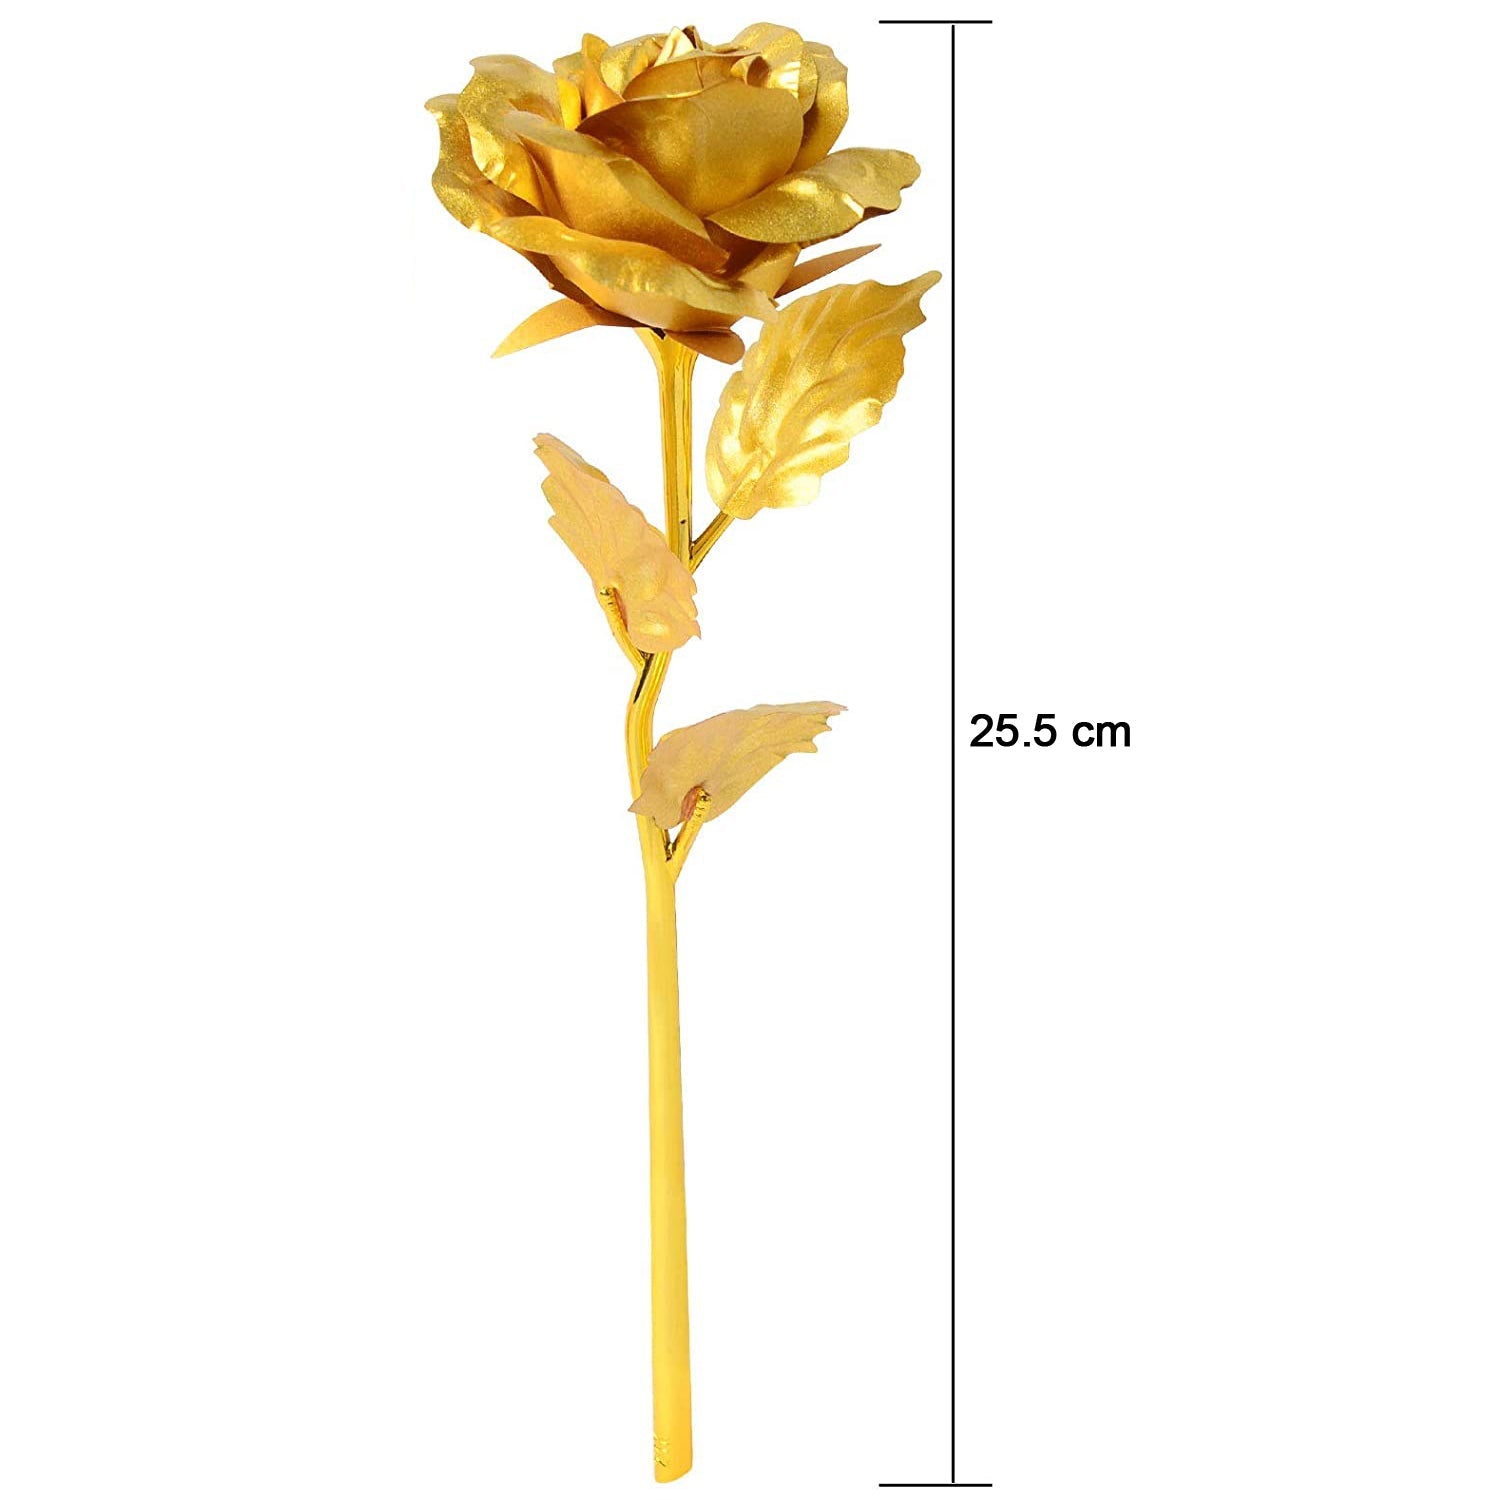 B Golden Rose used in all kinds of places like household, offices, cafe's, etc. for decorating and to look good purposes and all.